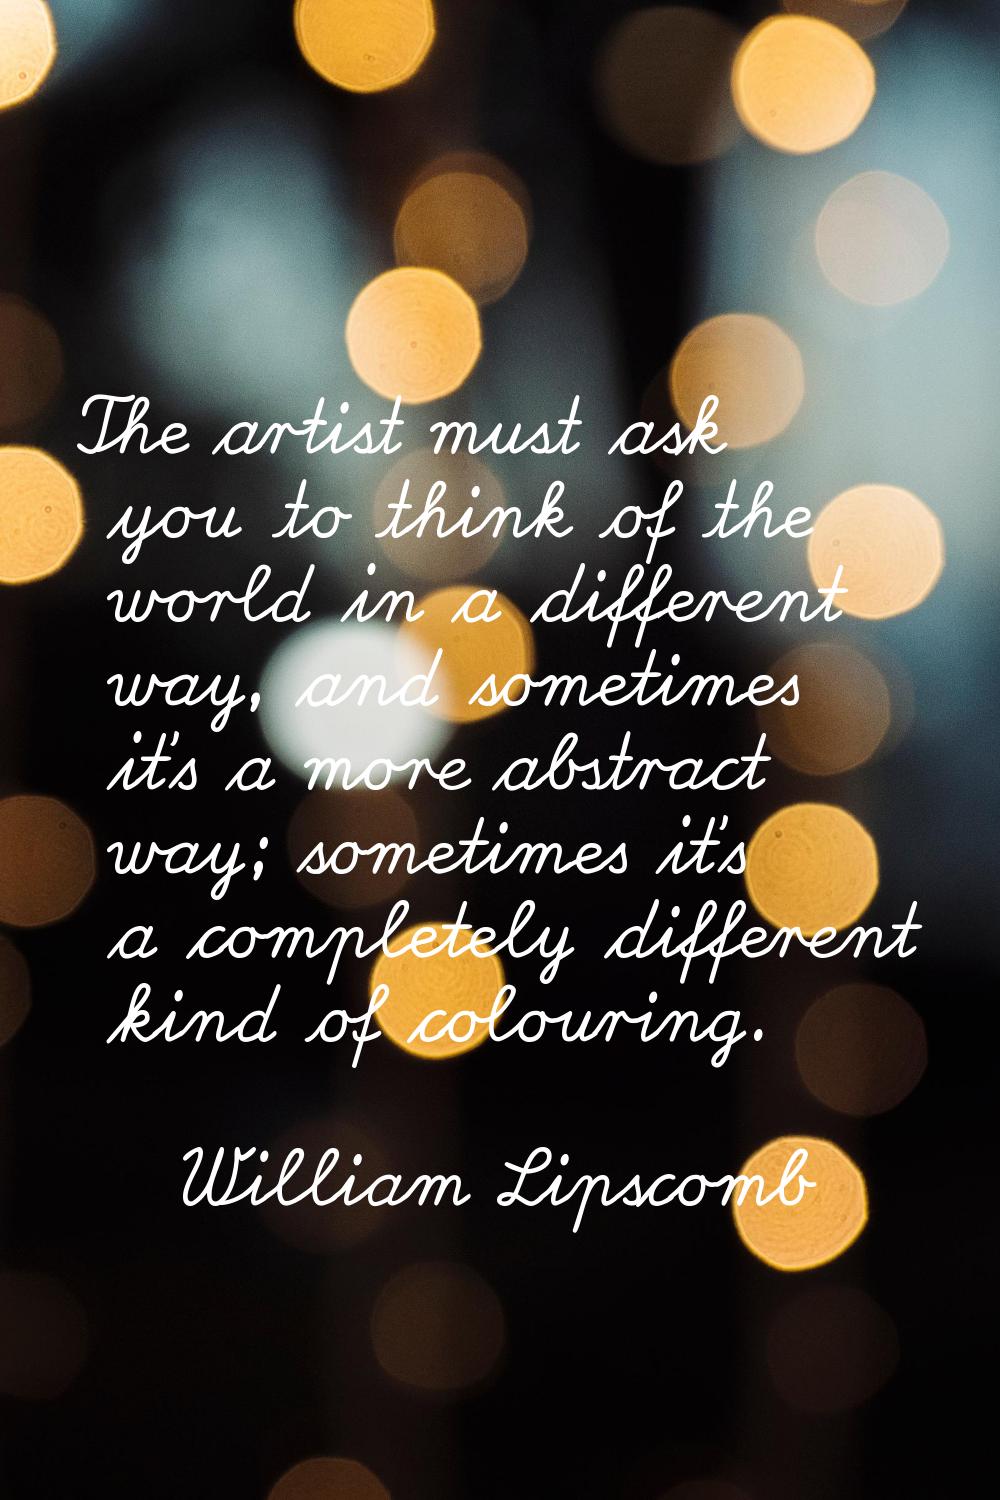 The artist must ask you to think of the world in a different way, and sometimes it's a more abstrac